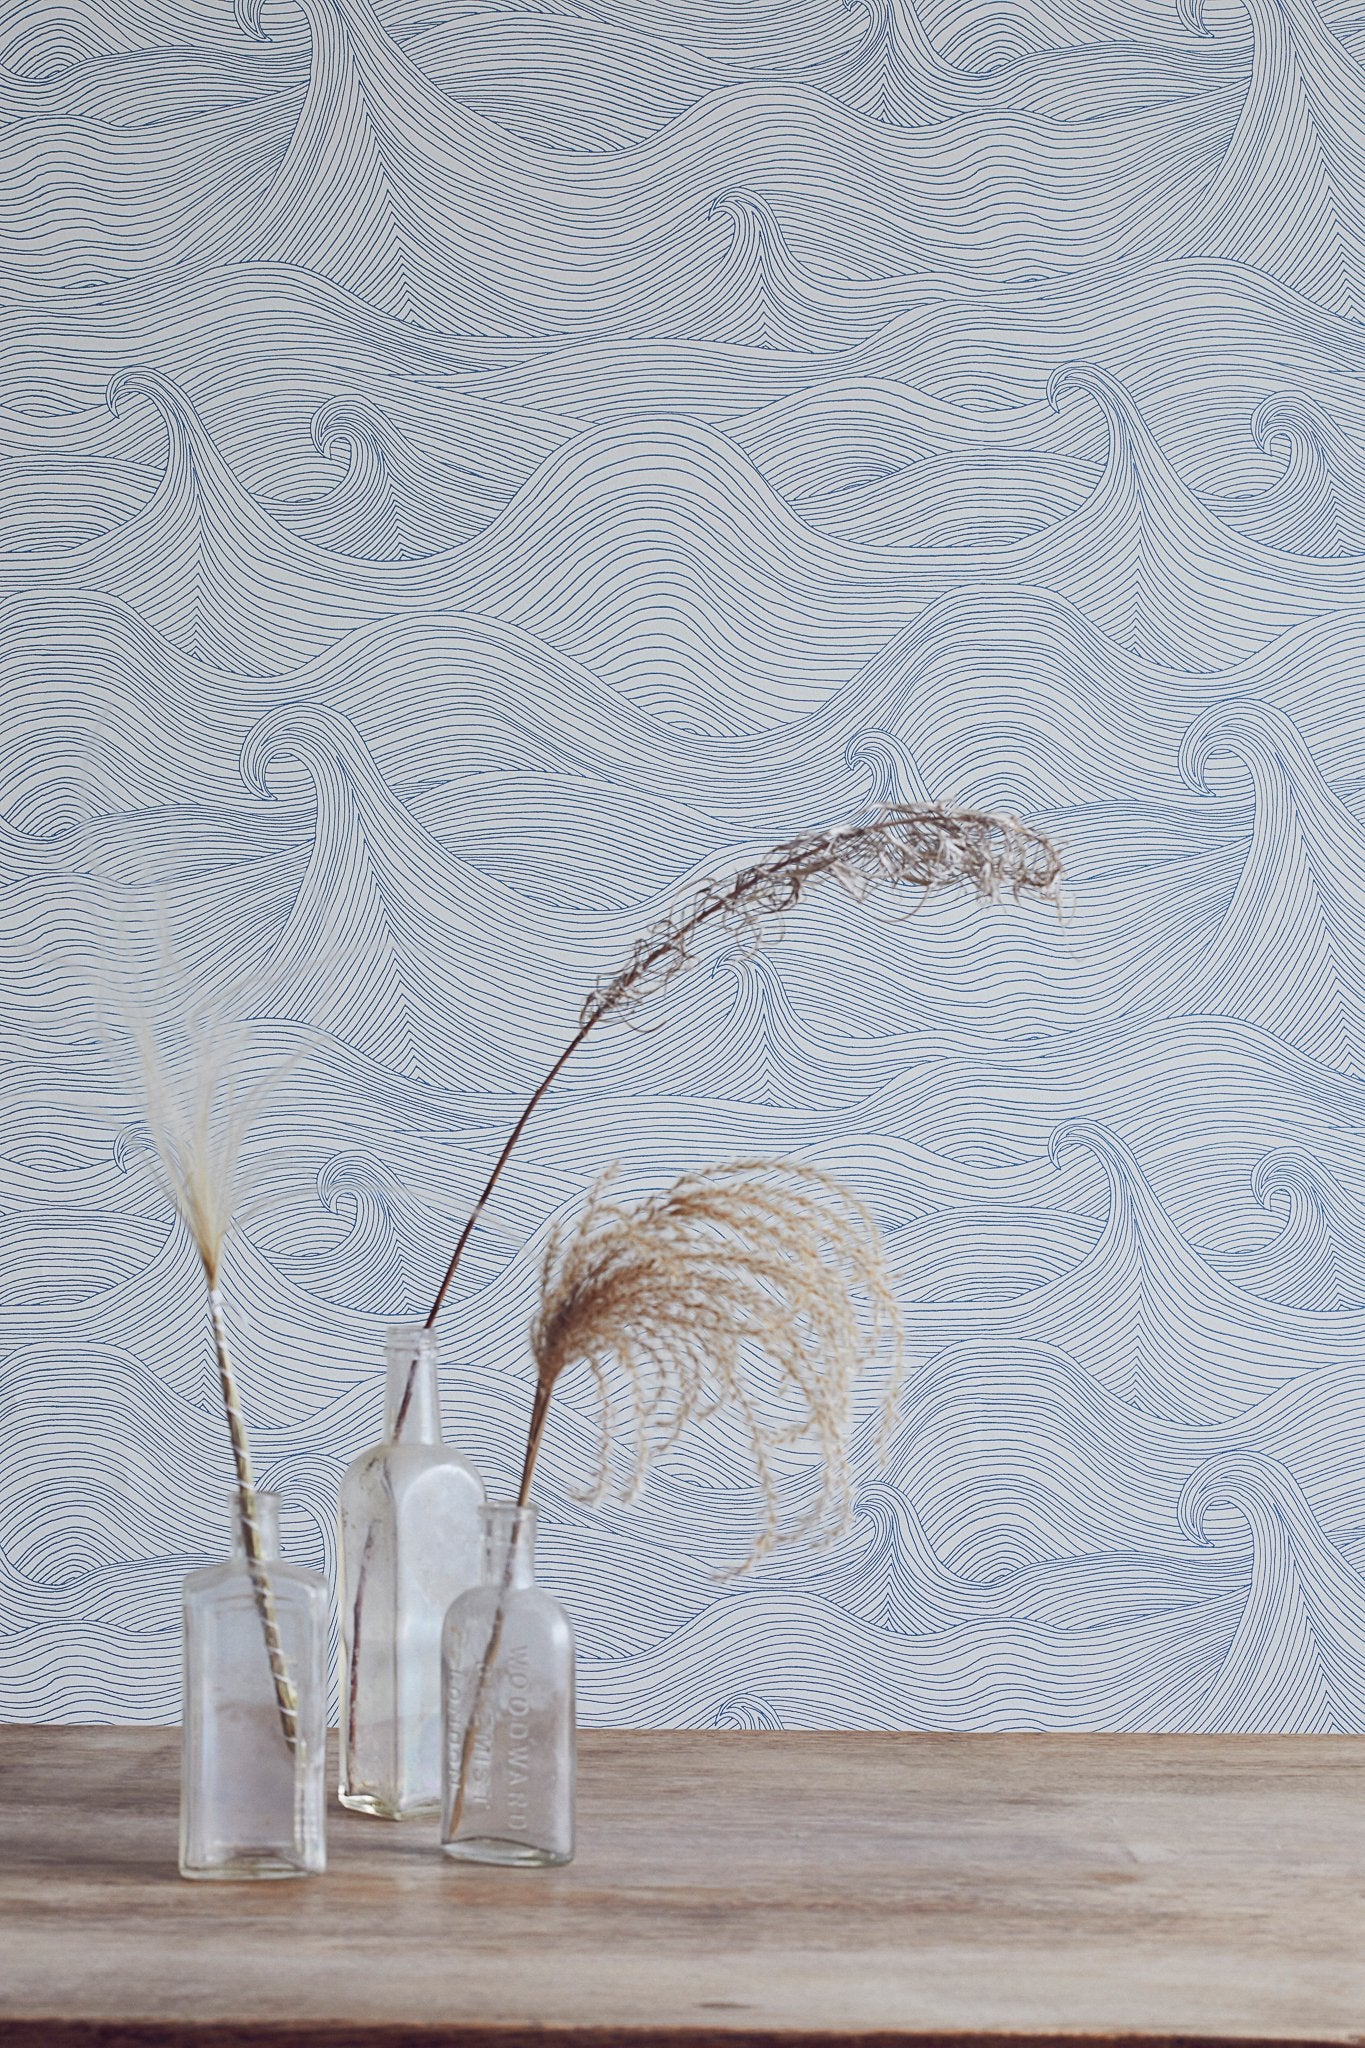 Abigail Edwards - Seascape in Solstice - Blue Waves on White ...